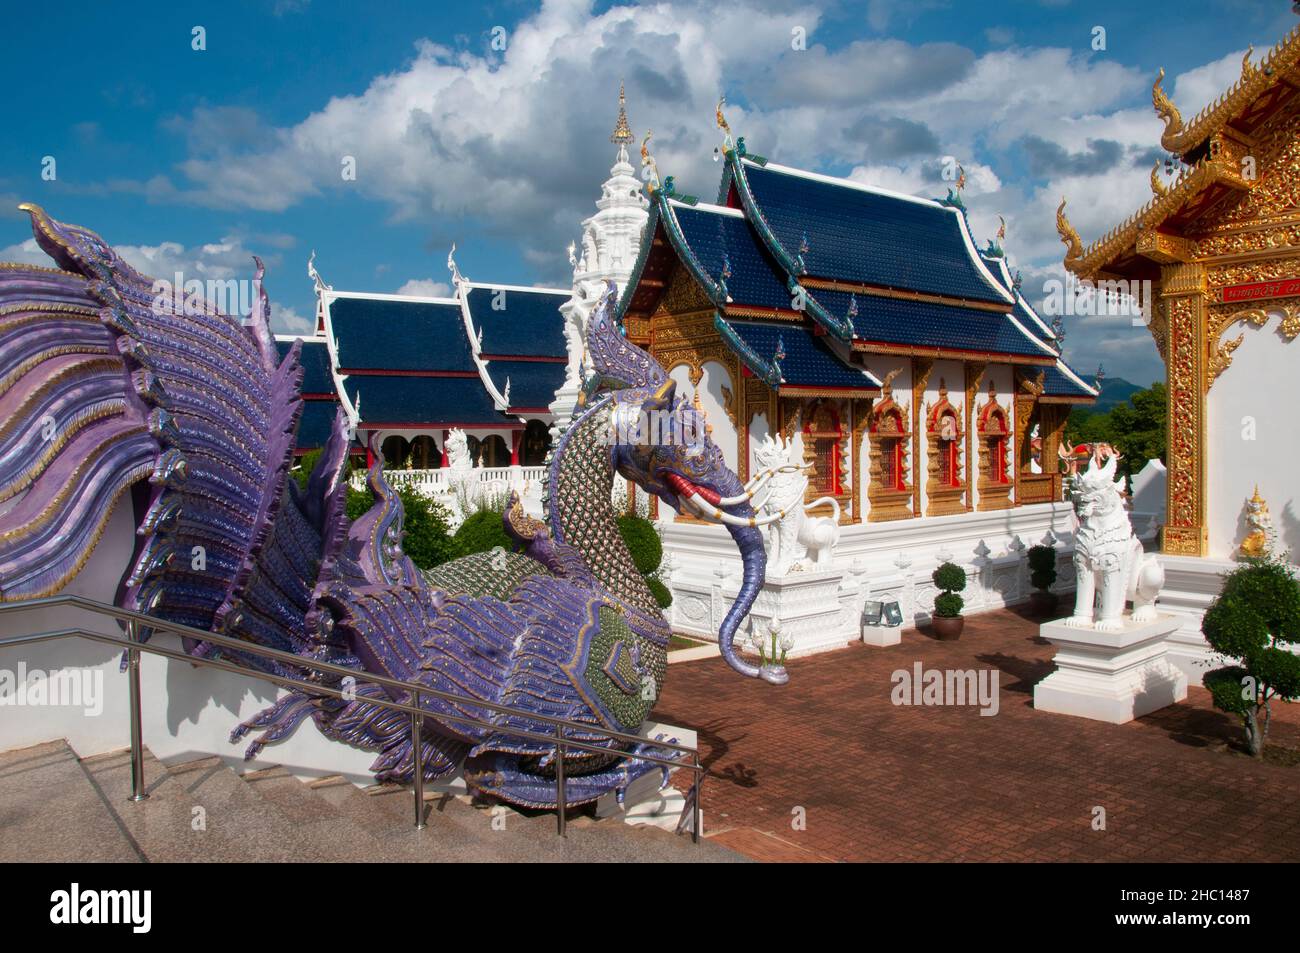 Thailand: Wat Ban Den, Ban Inthakin, Mae Taeng District, Chiang Mai. Wat Ban Den, also known as Wat Bandensali Si Mueang Kaen, is a large Buddhist temple complex north of the city of Chiang Mai in Northern Thailand. Stock Photo